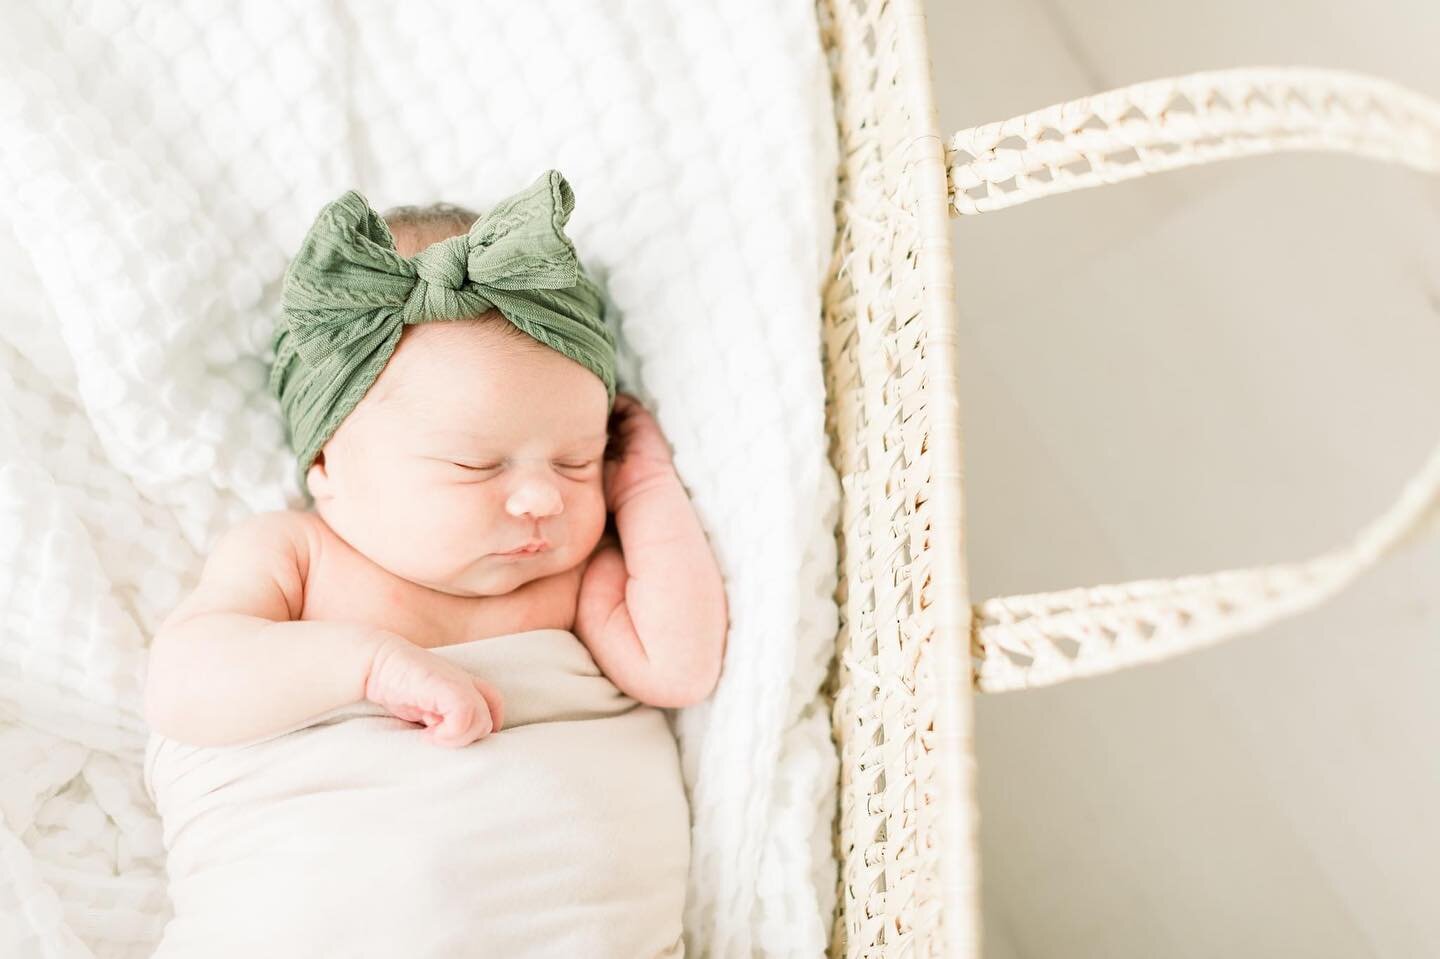 It&rsquo;s the posed arms for me! My favorite part of a newborn session is when we slowly unswaddle at the end. Babies always do the cutest things with their arms and make the sweetest little noises.